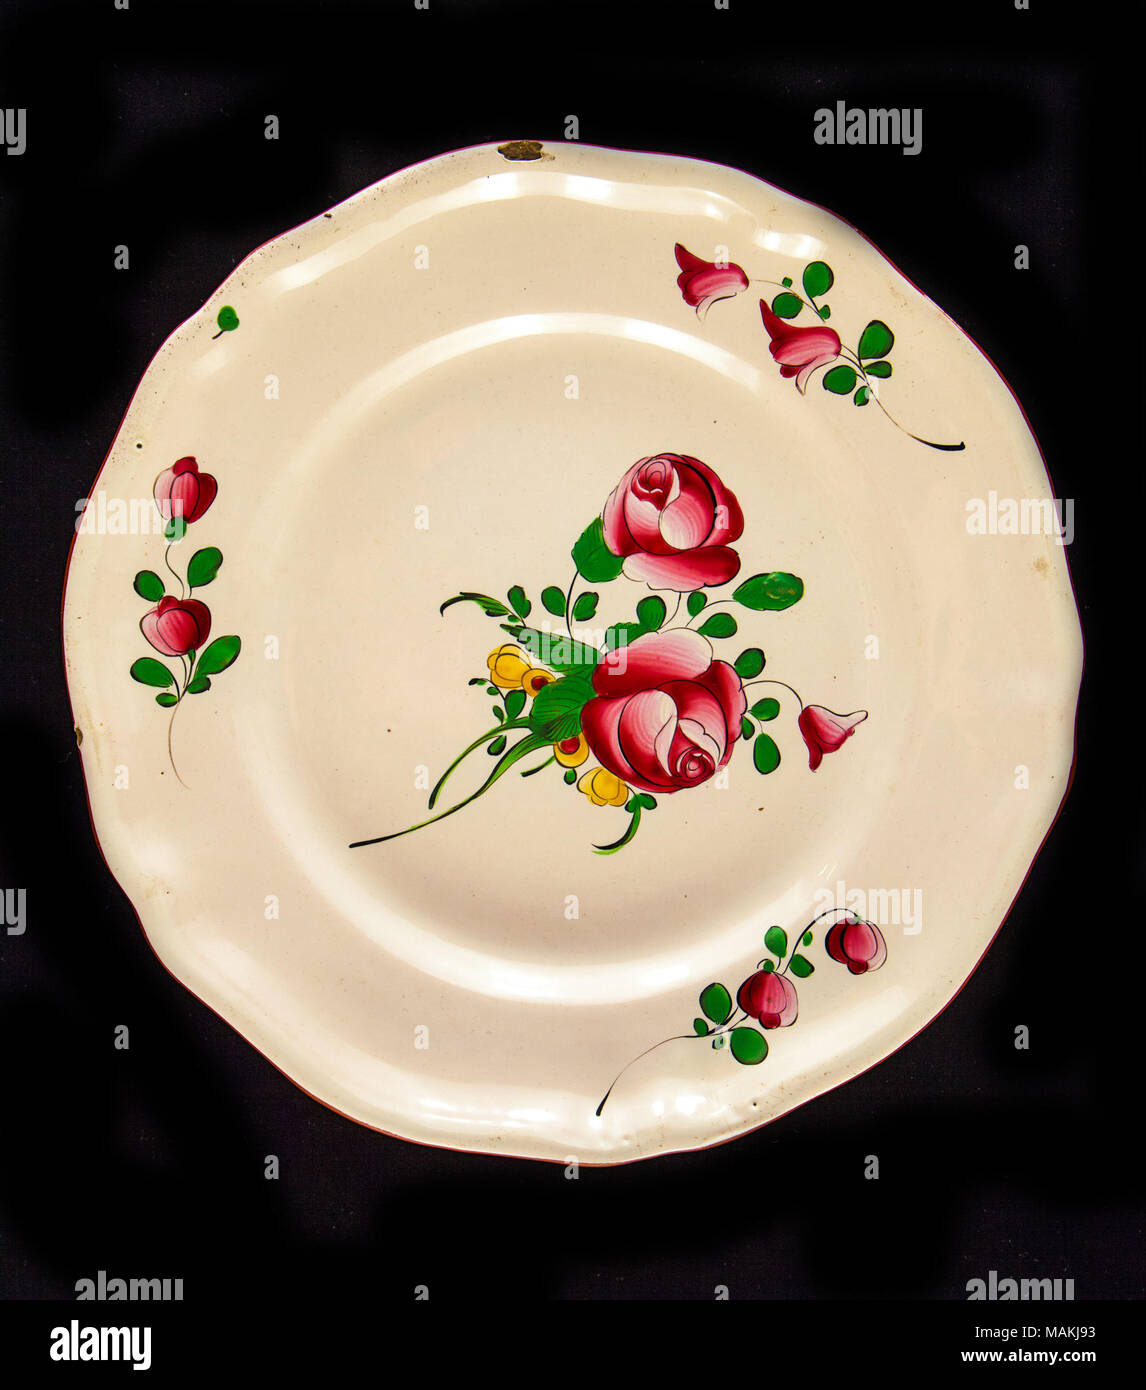 French faience, tin-glazed earthenware plate with floral decorations. Belonged to Auguste Chouteau and descended through the Chouteau family. Title: French Ceramic Plate from Chouteau Family  . circa 1800. Stock Photo